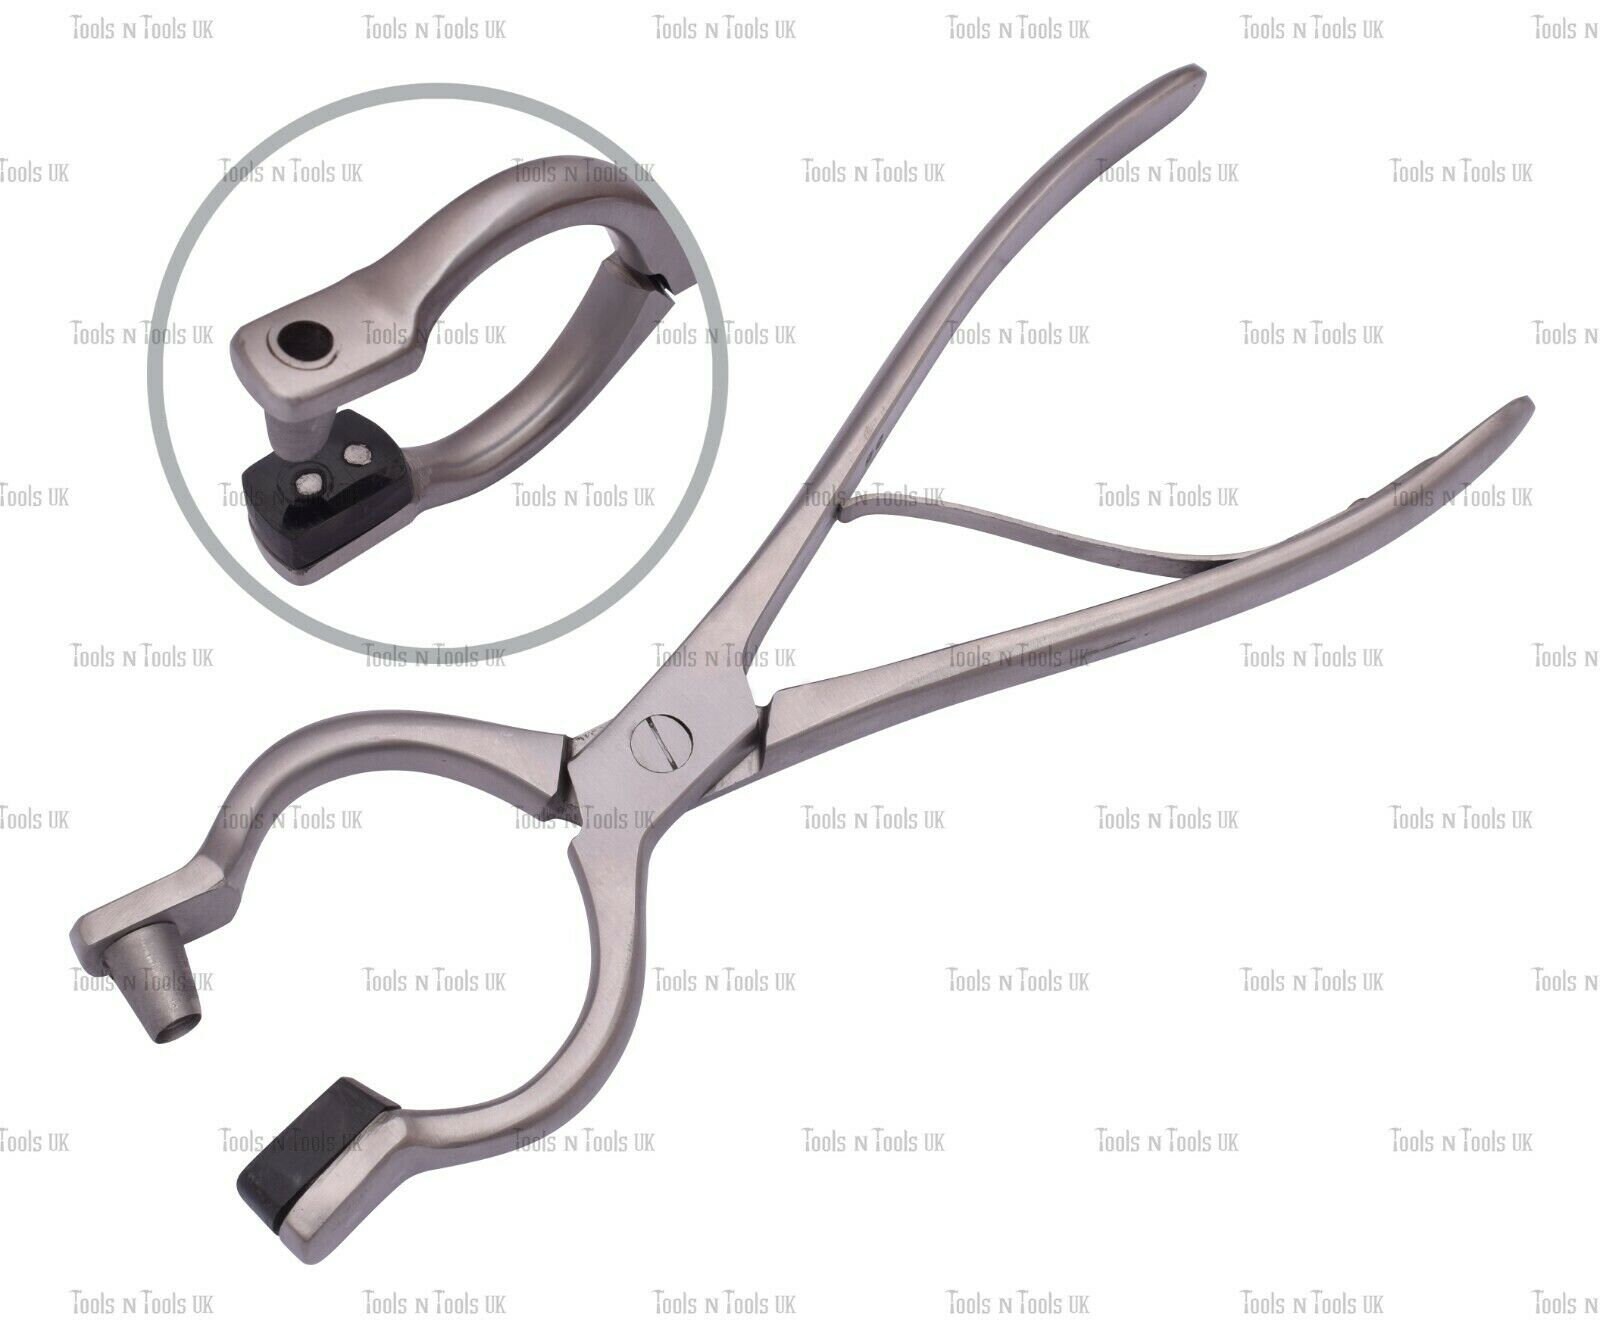 Stainless Steel Bull Cow Cattle Nose Husbandry Access Spring Nose Pliers